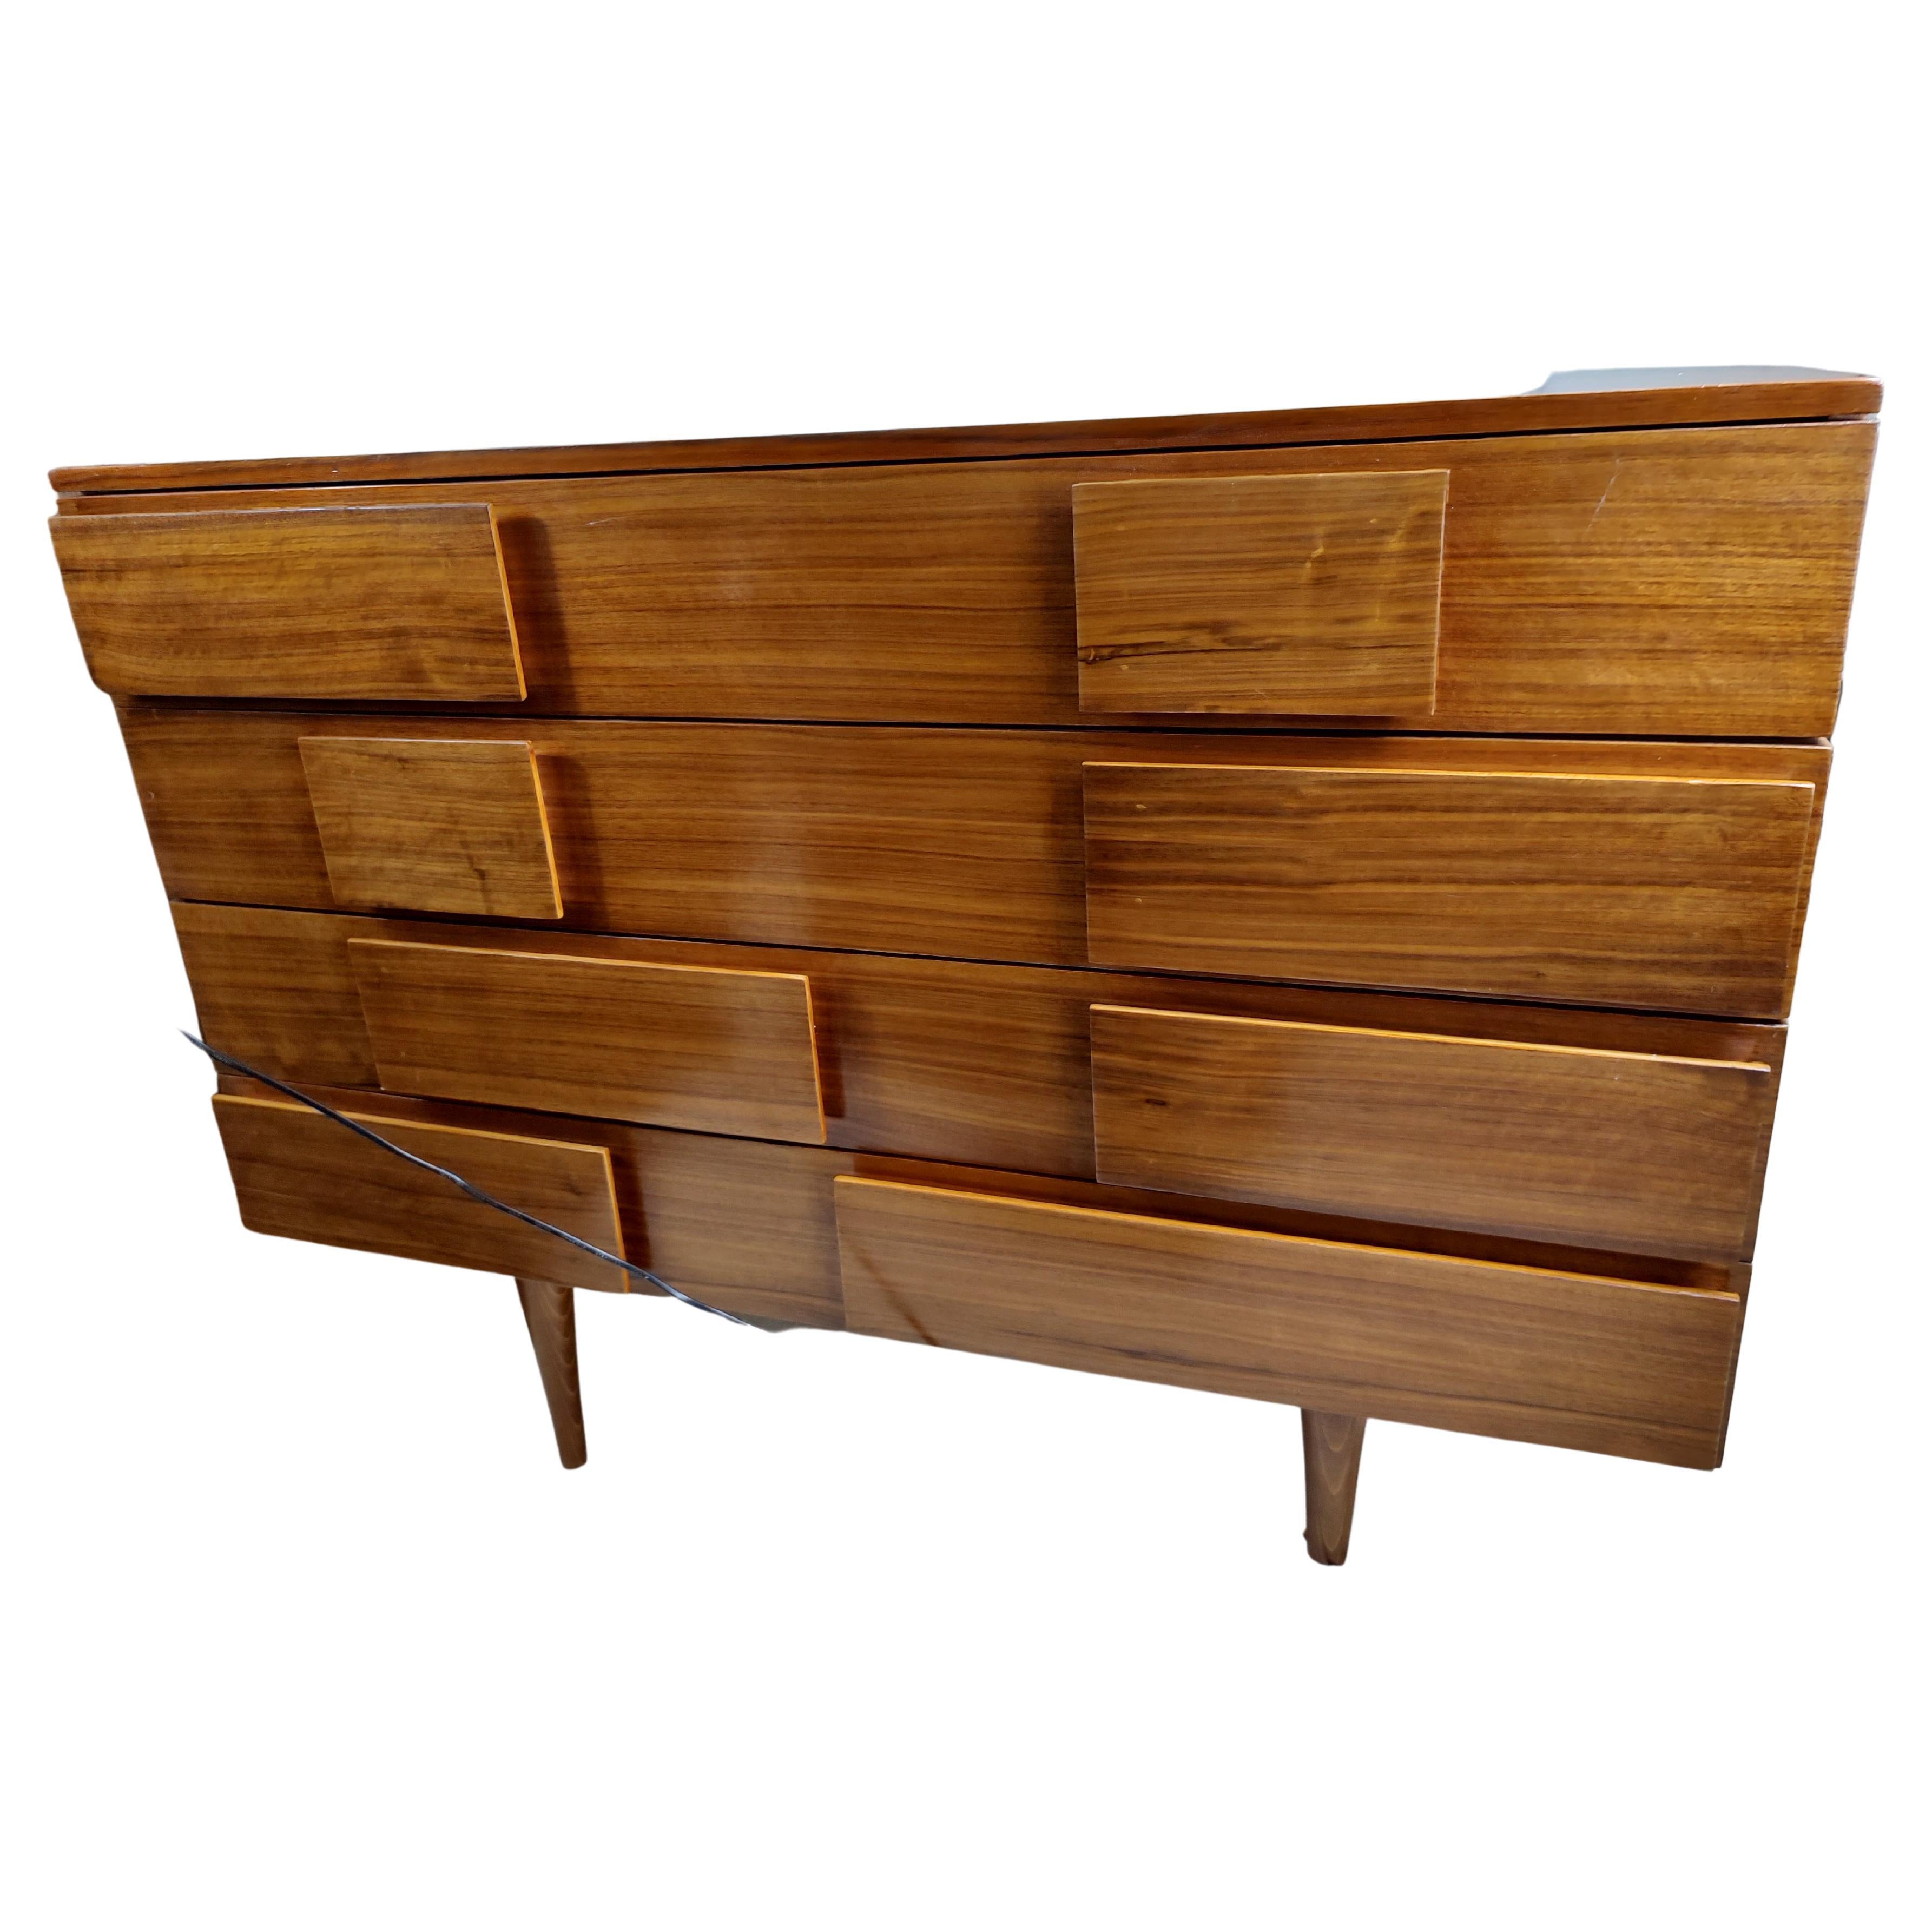 Mid-Century Modern Sculptural Dresser by Gio Ponti for Singer & Sons